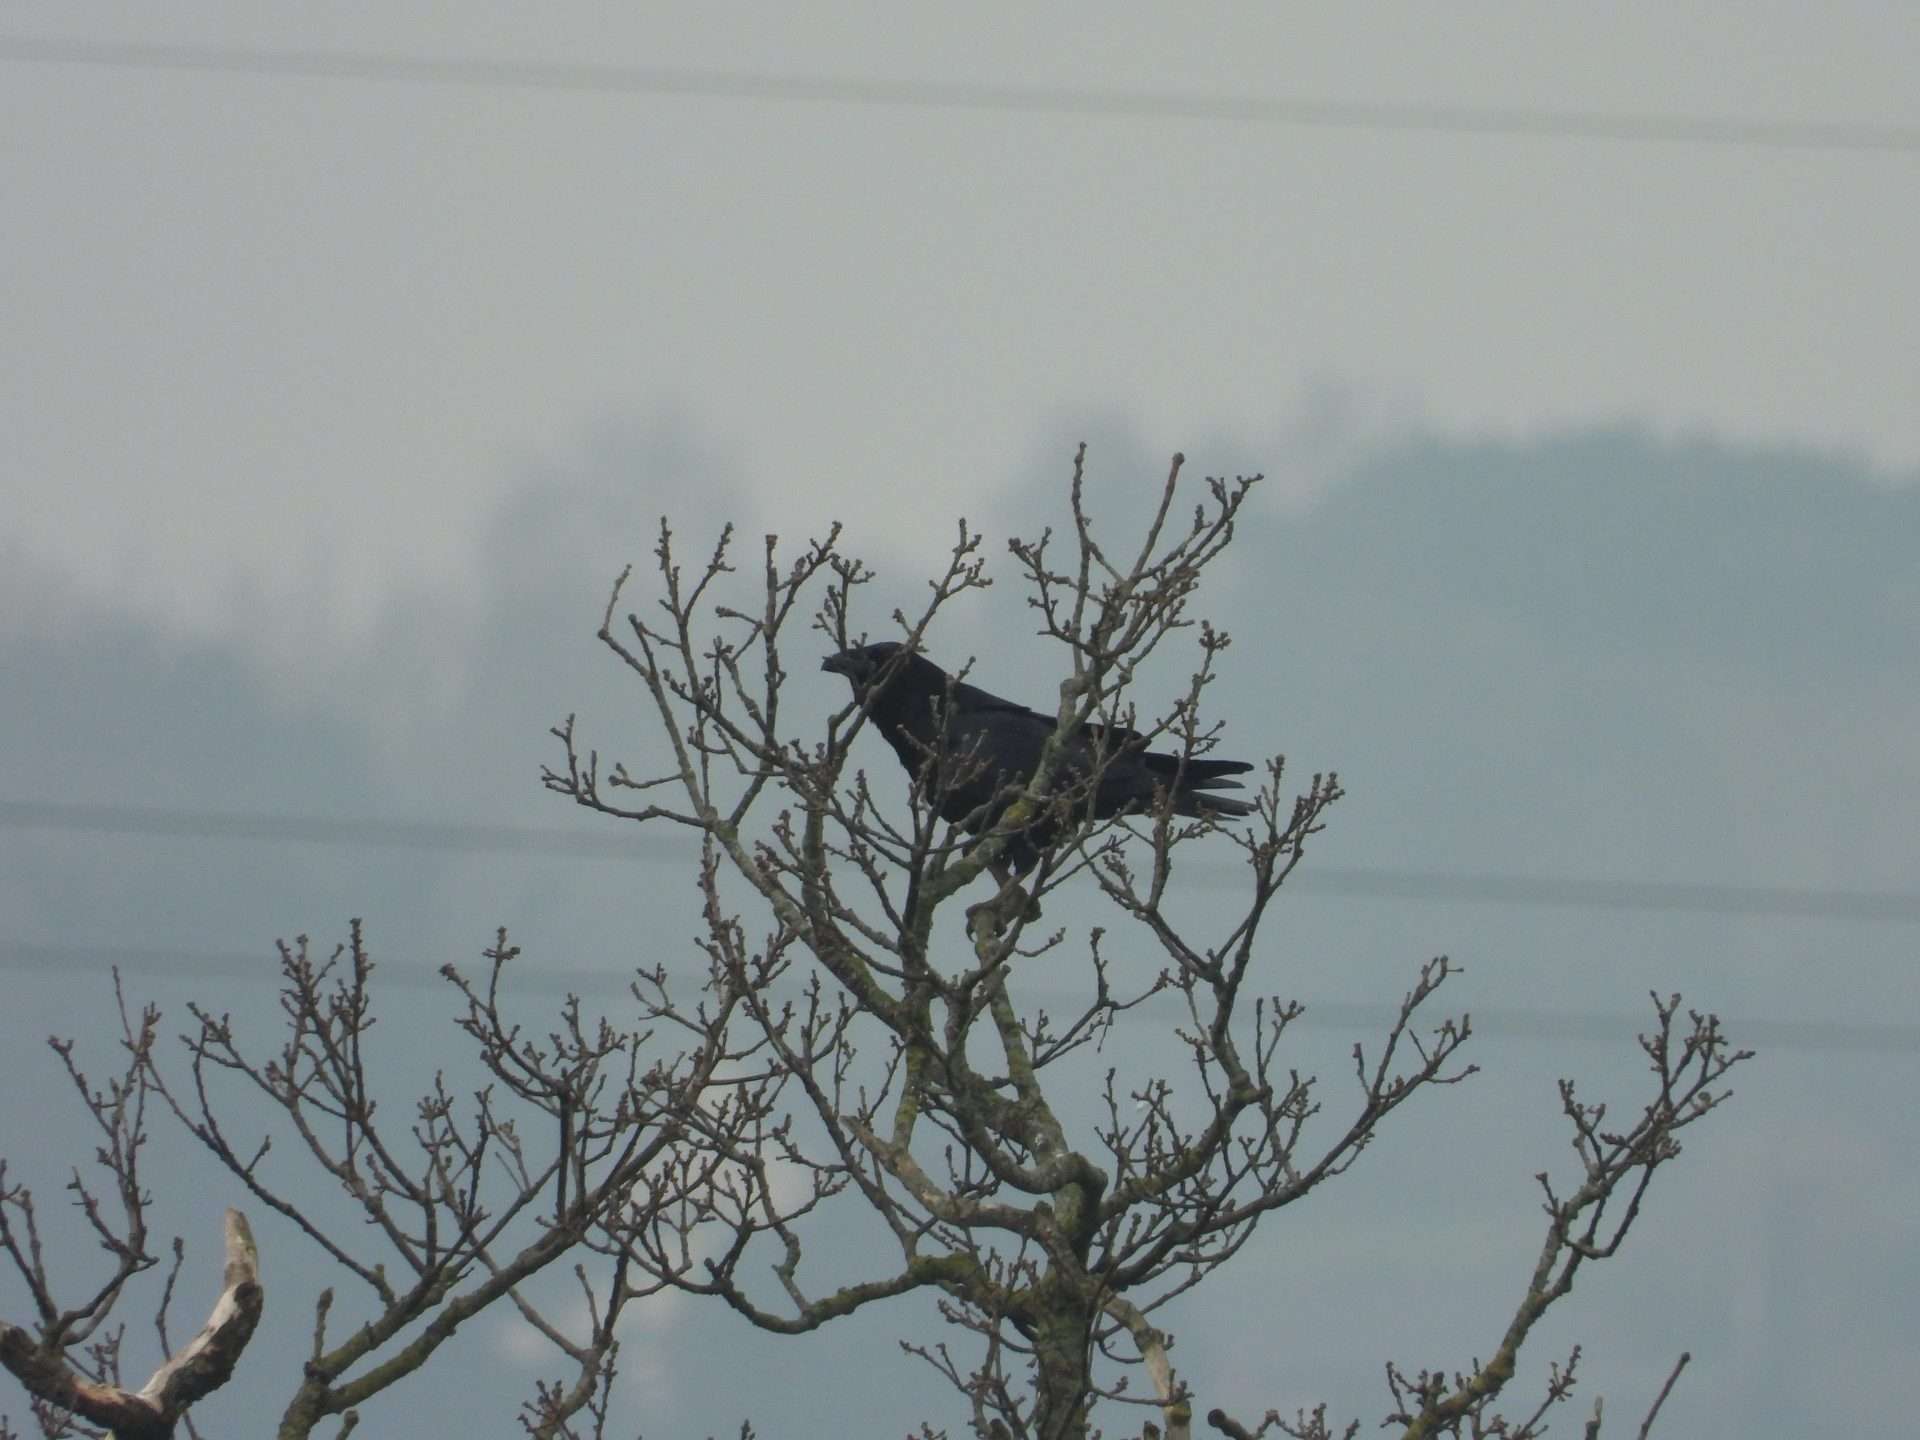 Raven by Kenneth Bradley at Exminster marshes RSPB